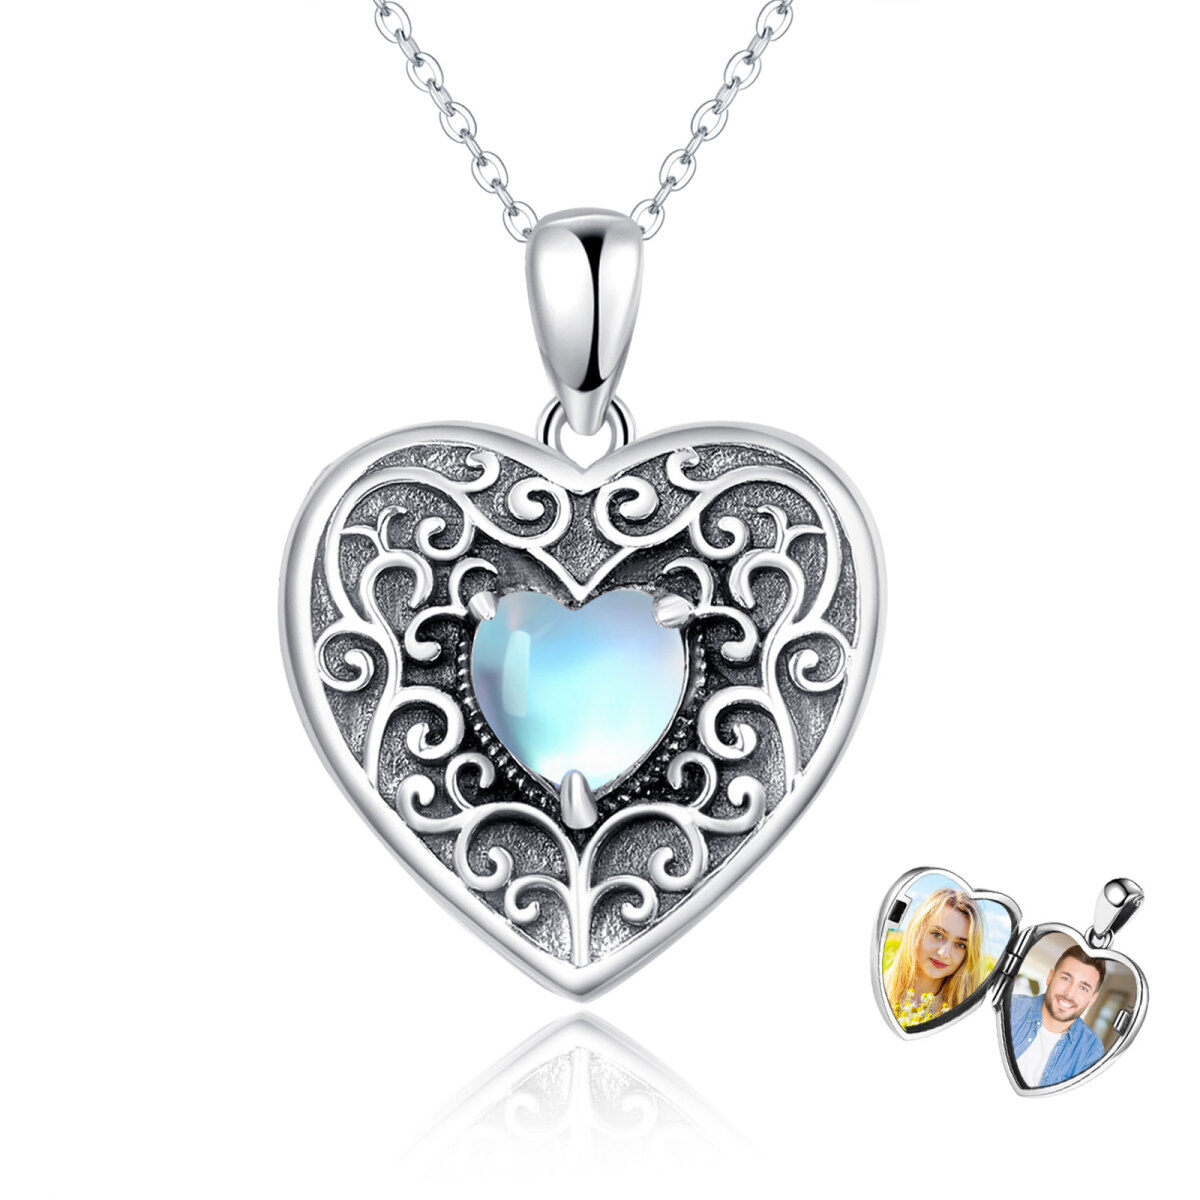 Sterling Silver Heart Shaped Moonstone Personalized Photo & Heart Personalized Photo Locket Necklace with Engraved Word-1